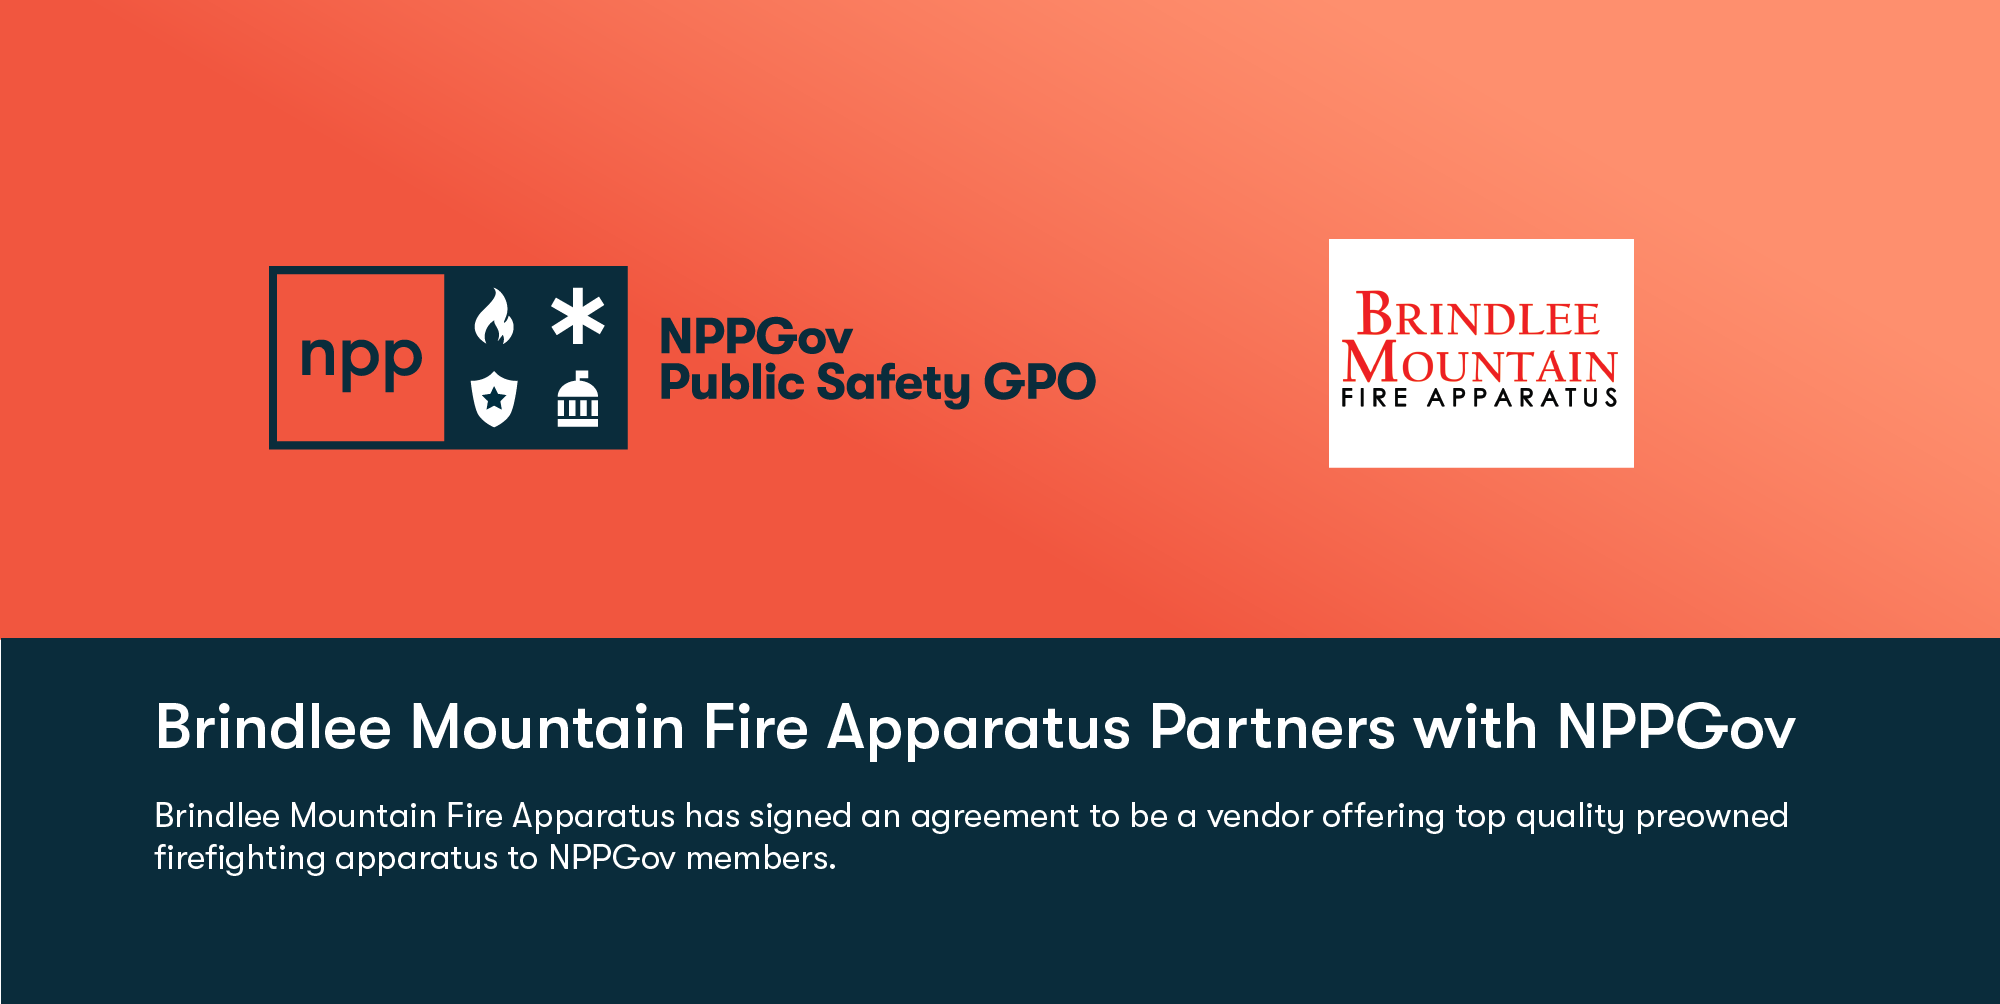 Brindlee Mountain Fire Apparatus Partners with NPPGov